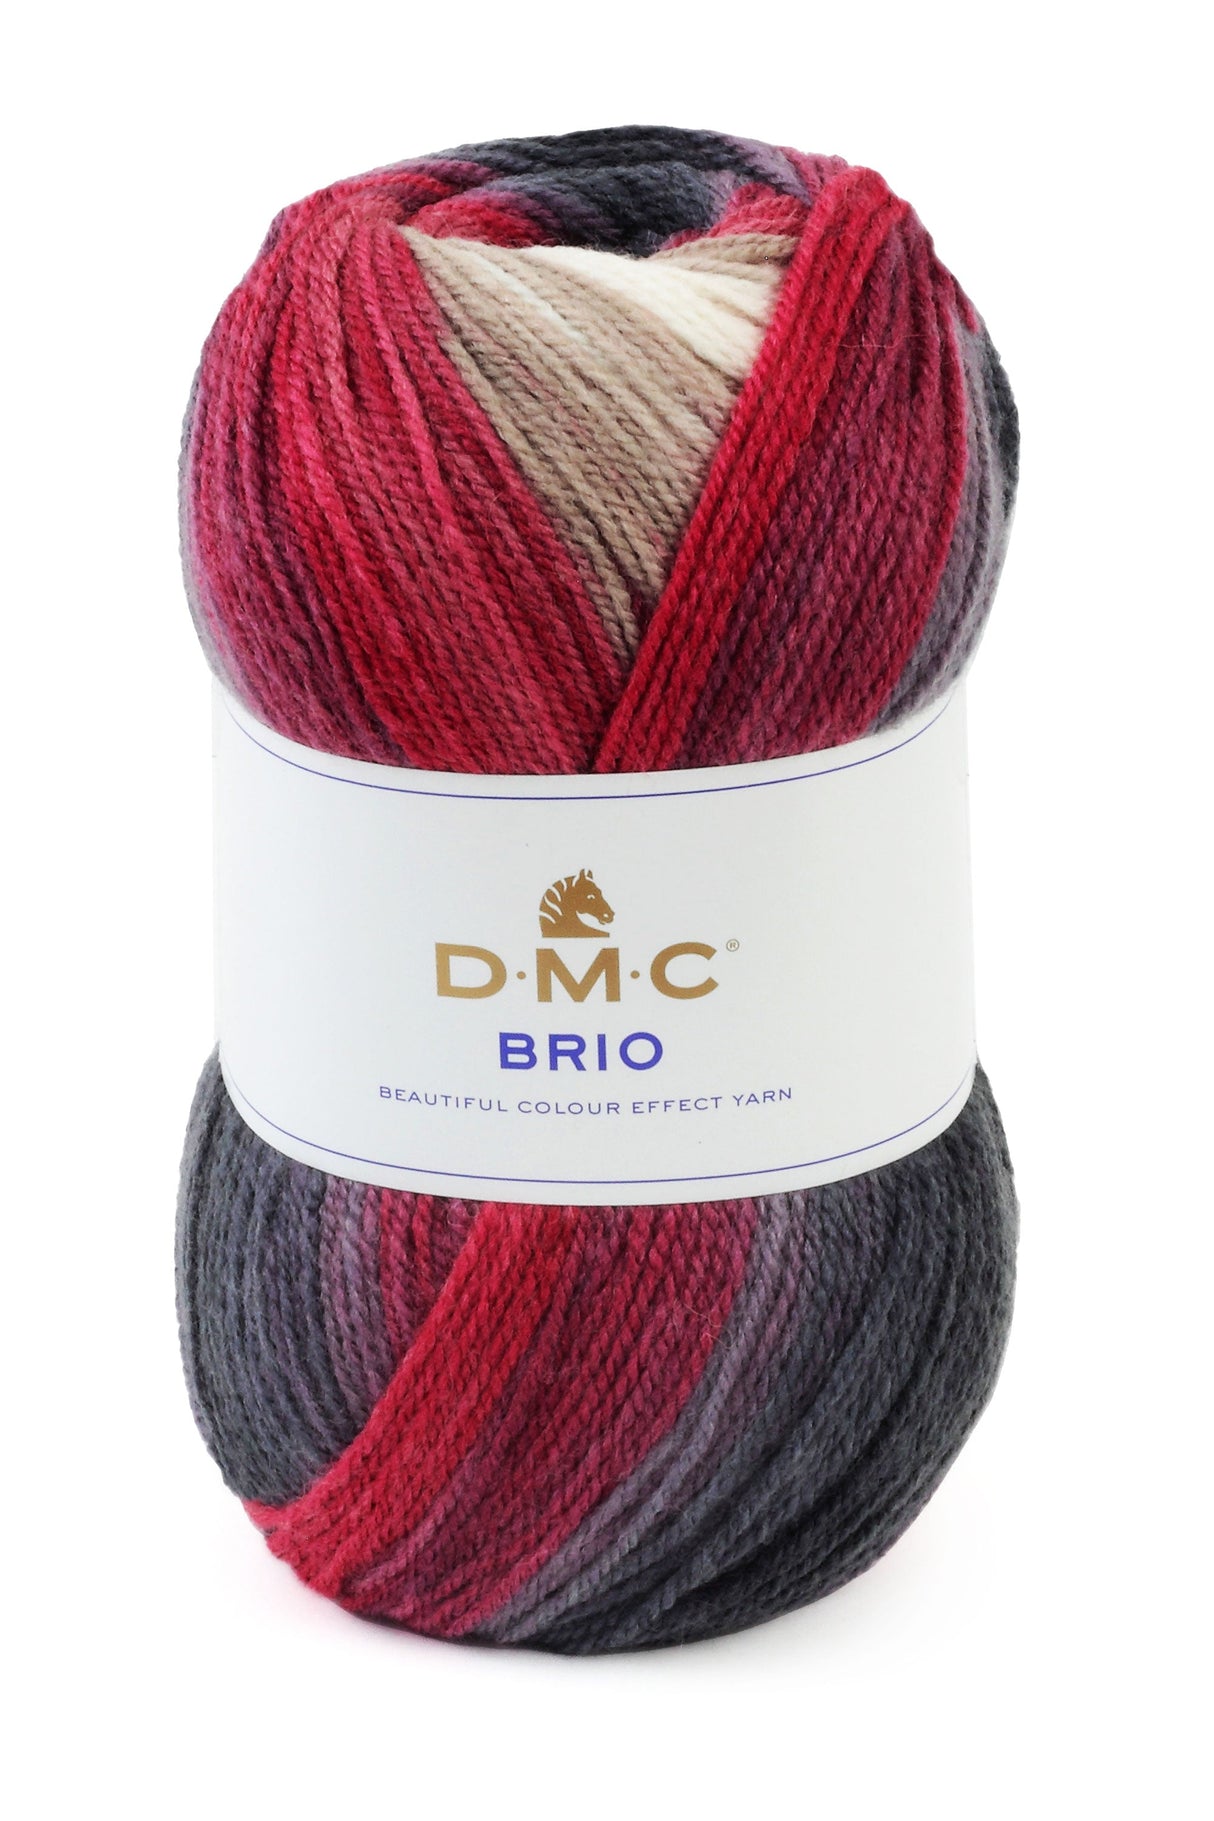 DMC Brio: Multicolor Wool with Gradient Effect for Knitting Autumn and Winter Garments